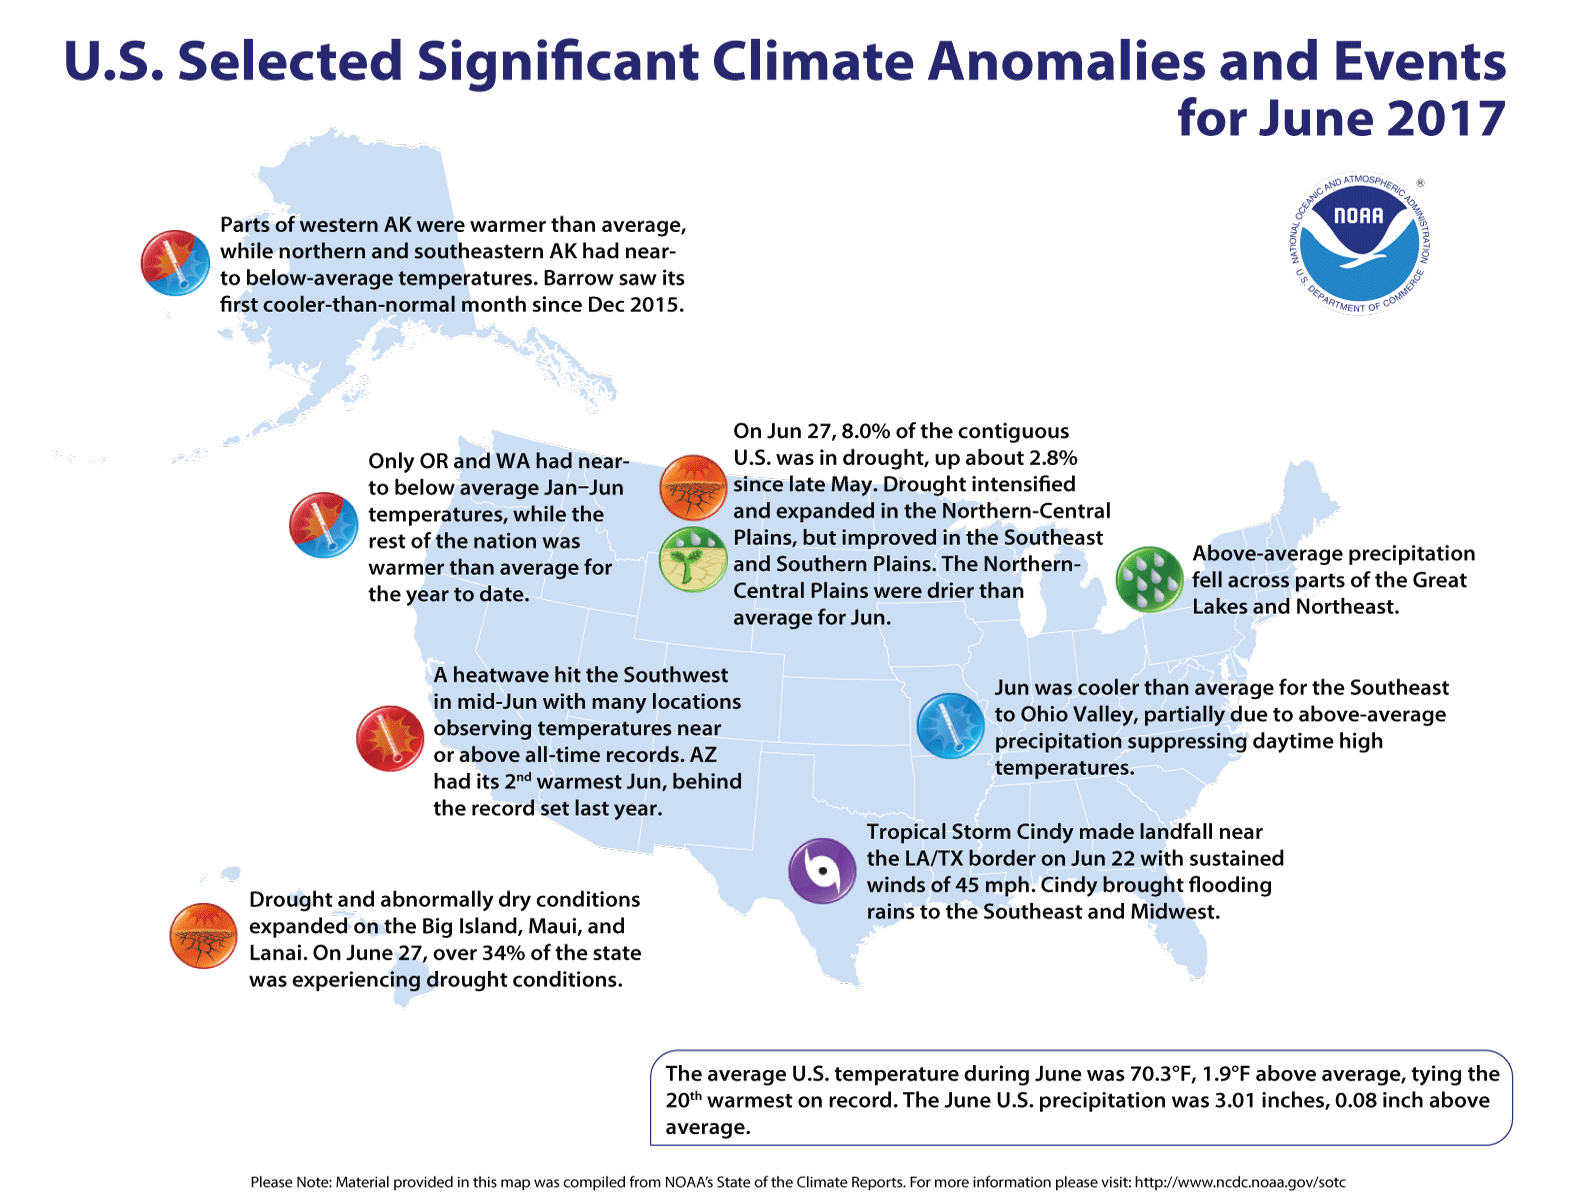 See what other significant climate events occurred across the country in June.